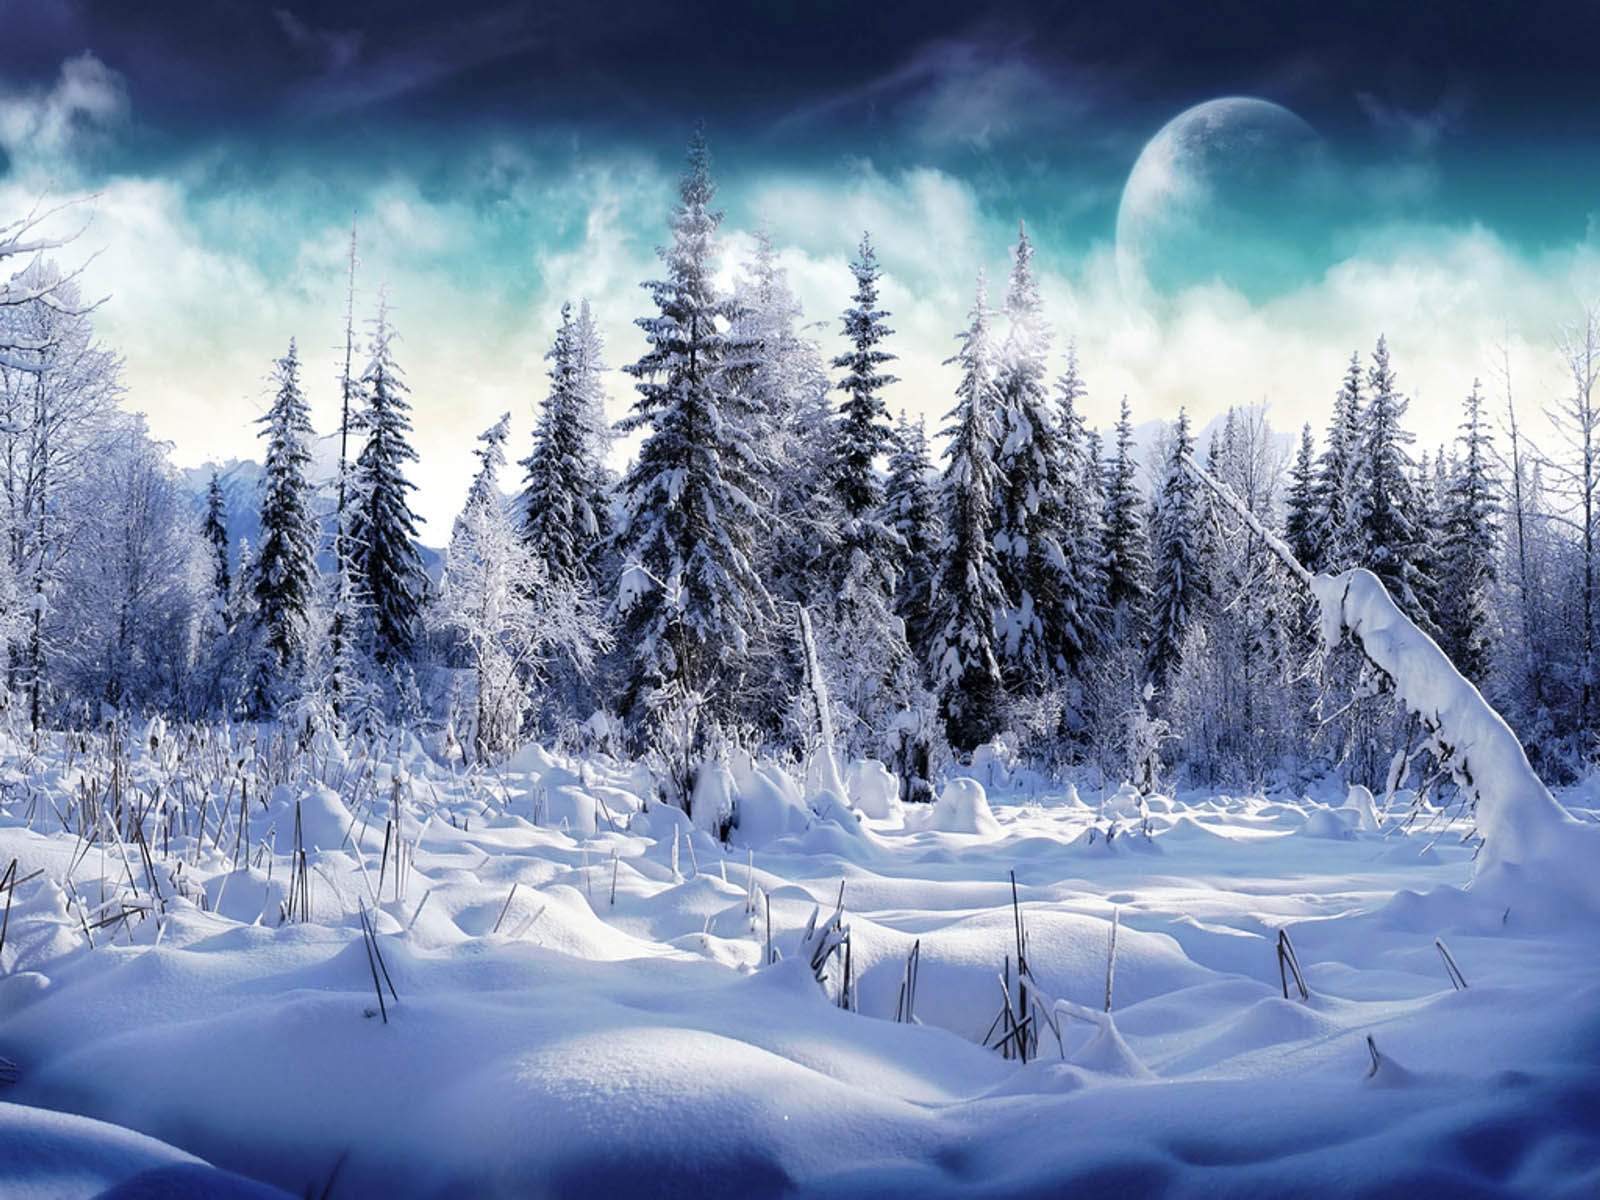 snow wallpapers snow desktop wallpapers snow desktop backgrounds snow